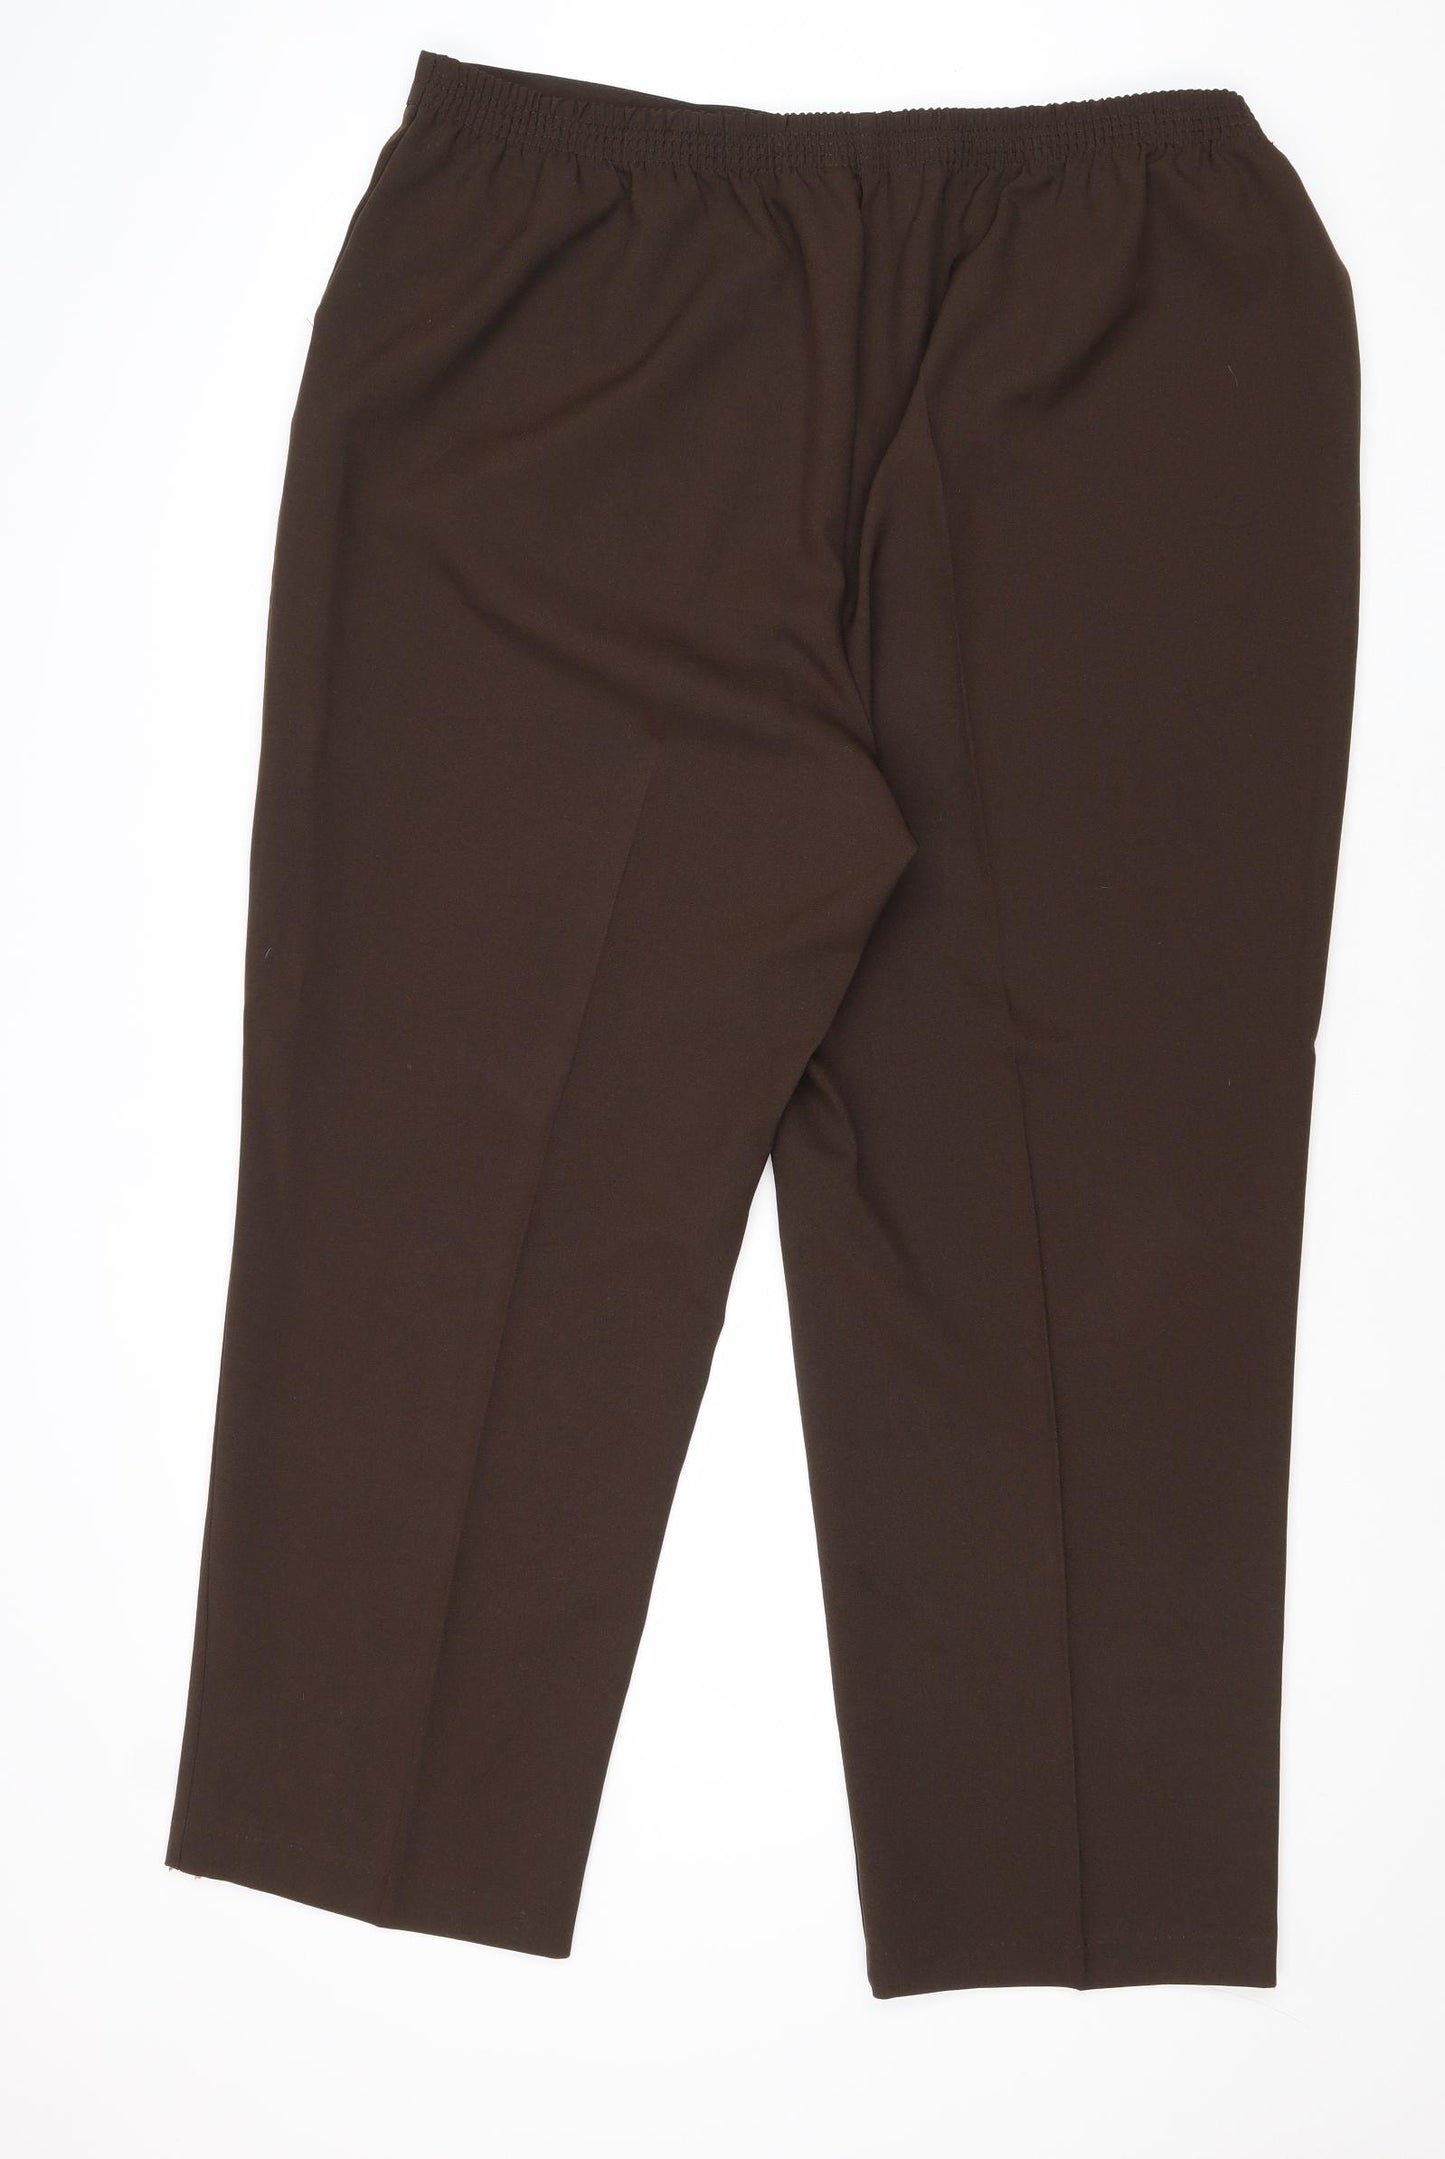 Bonmarché Womens Brown Polyester Trousers Size 22 Regular